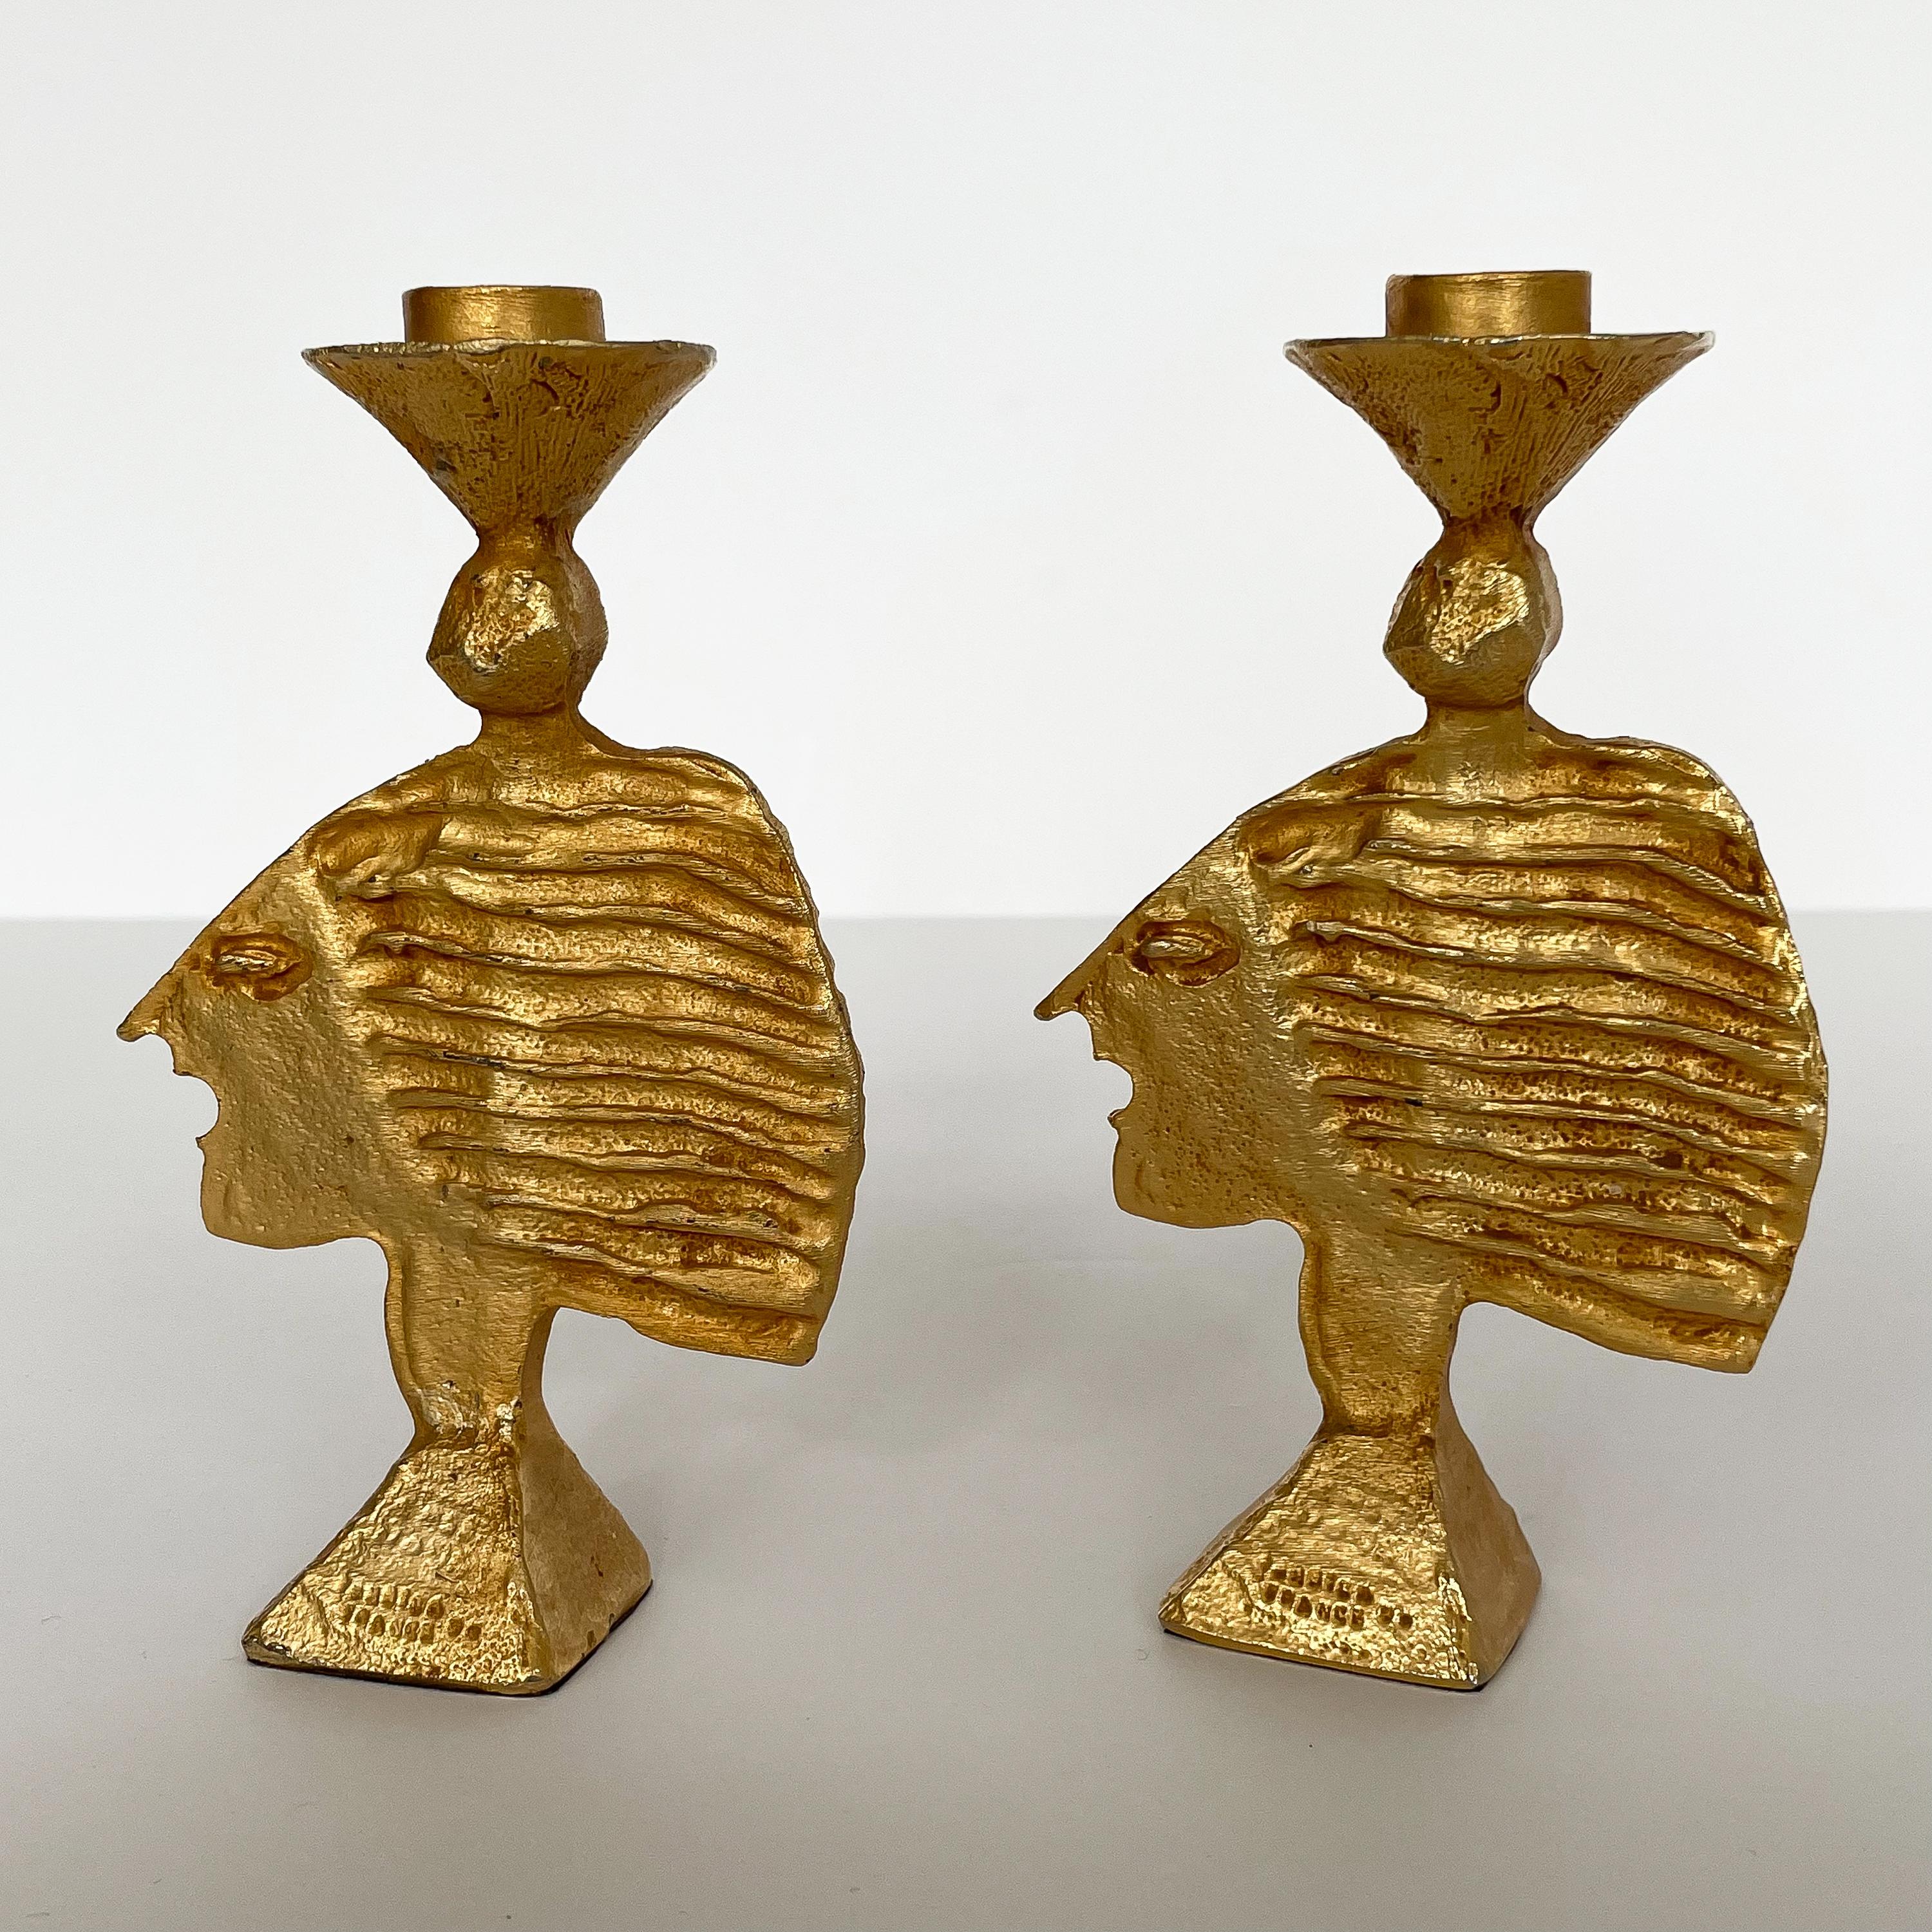 Late 20th Century Pair of French Gilt Metal Candlesticks by Pierre Casenove for Fondica